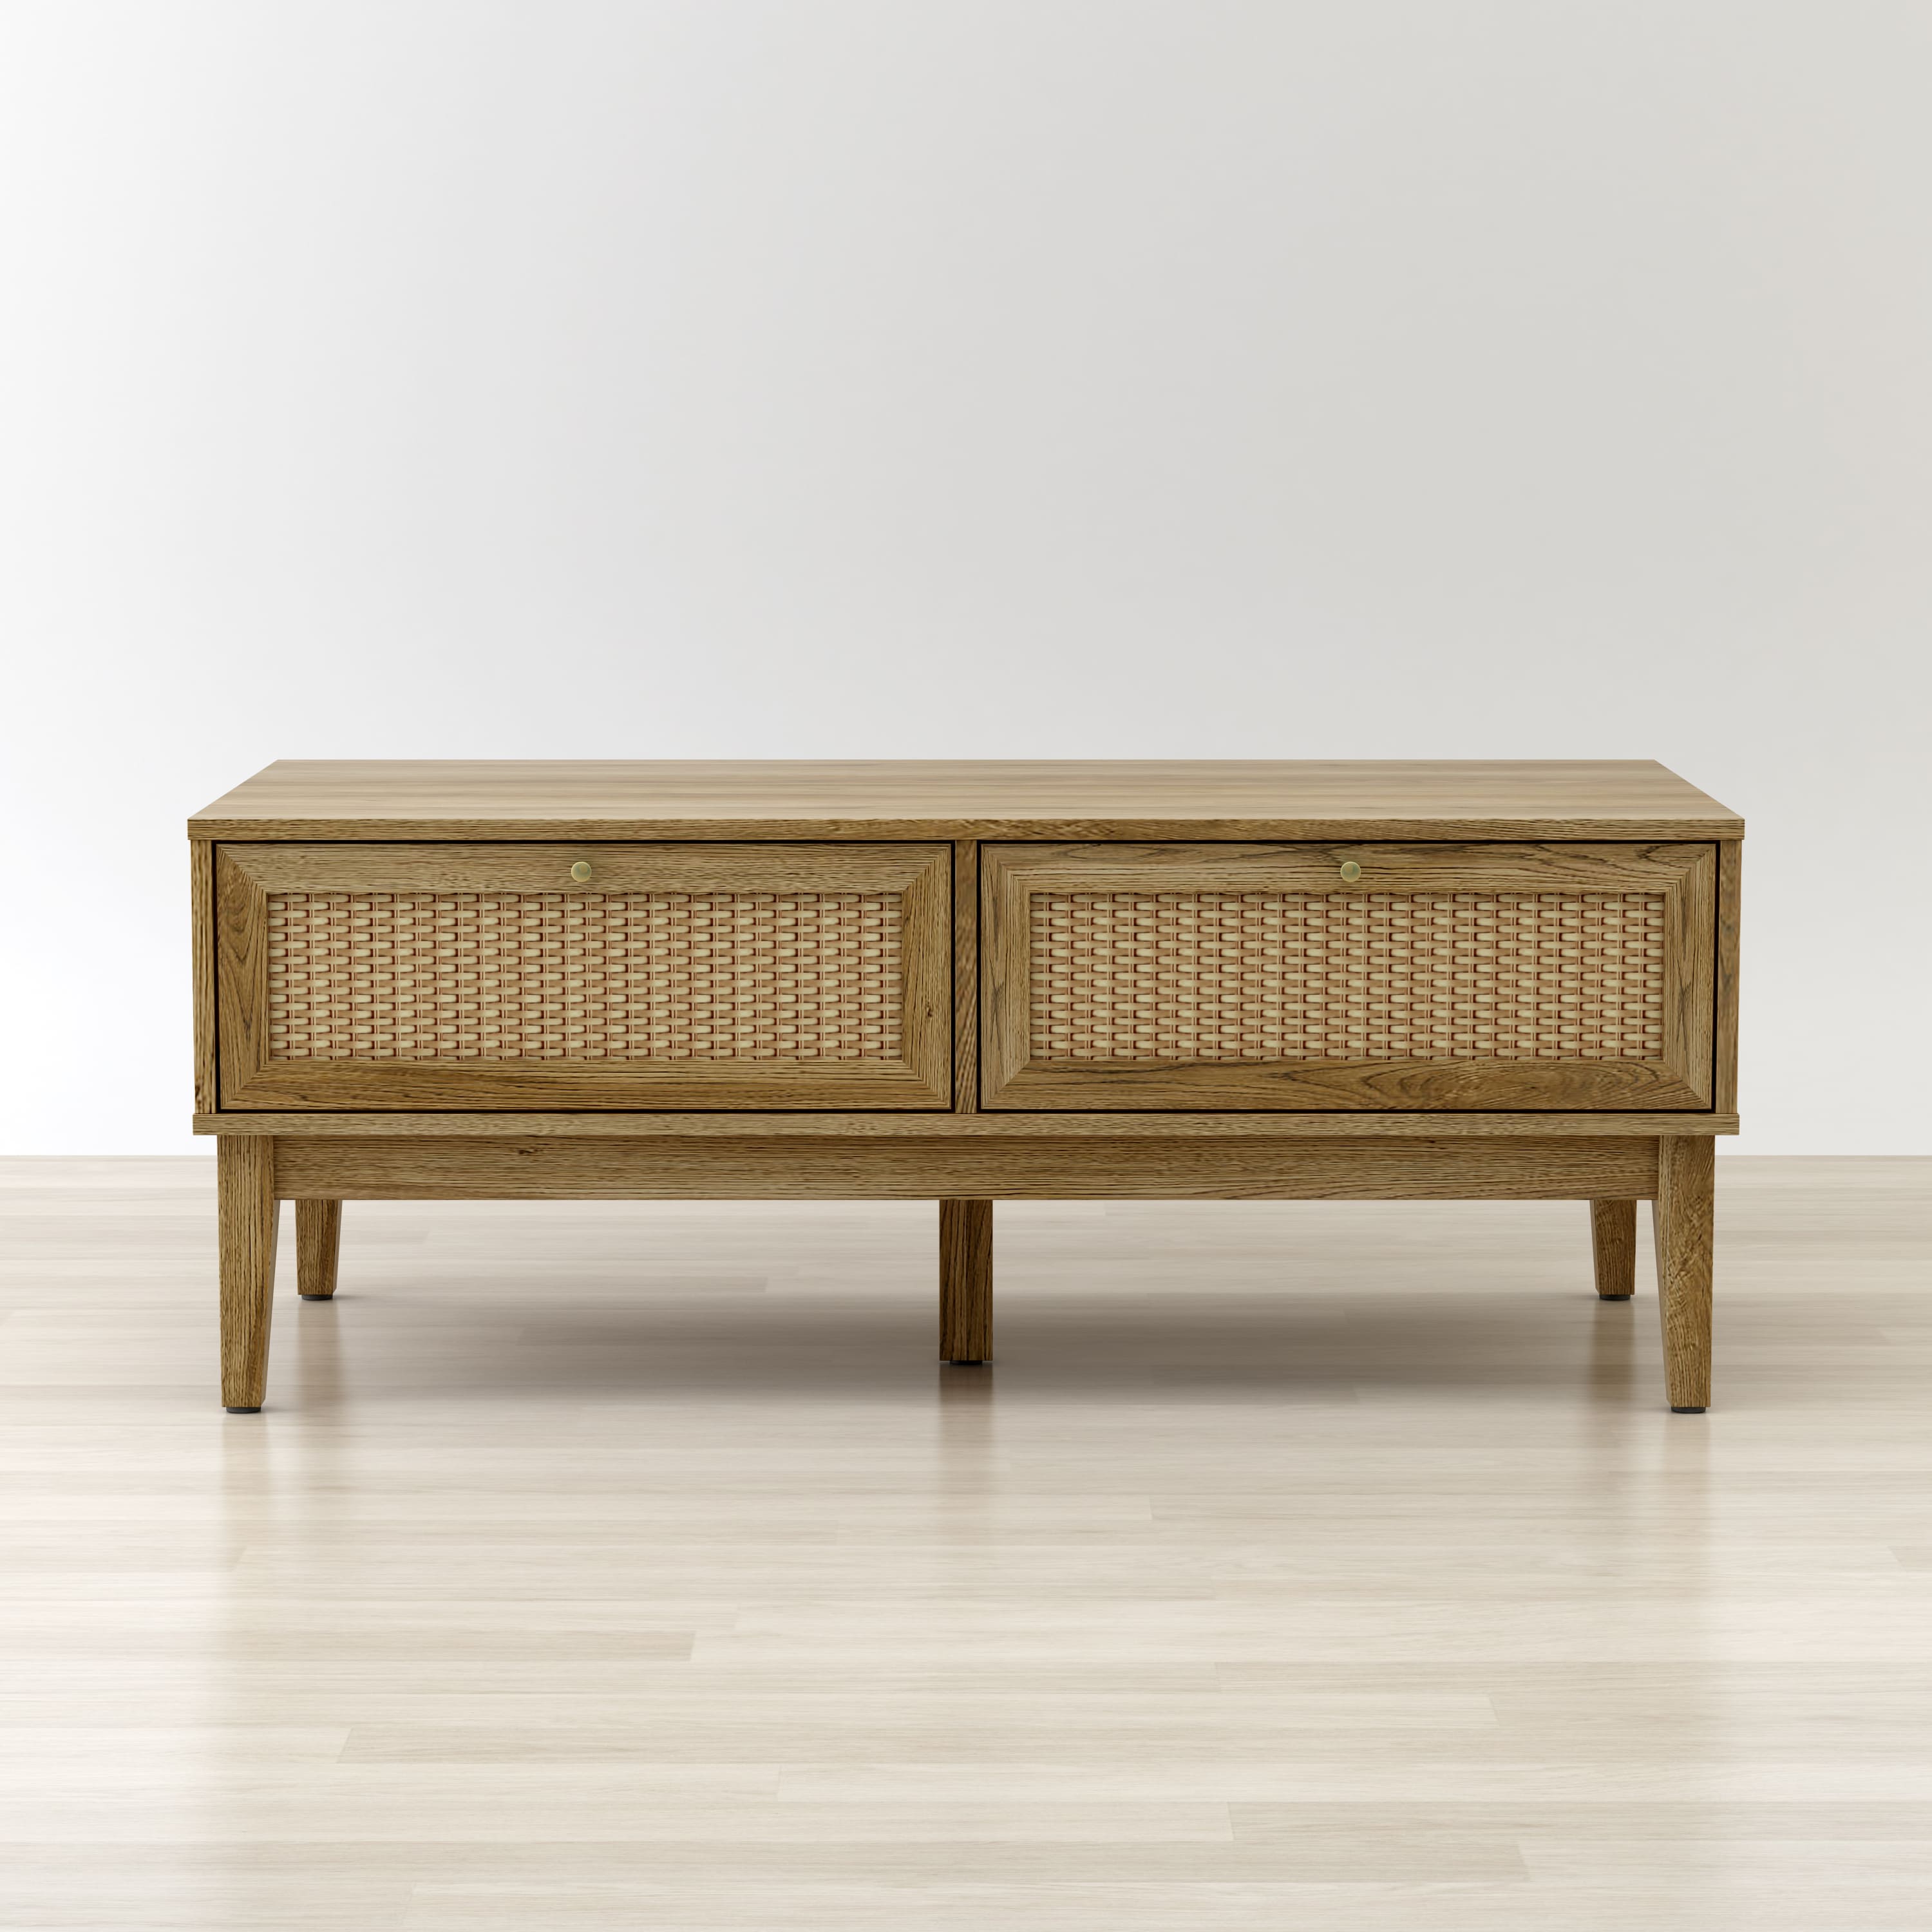 Anderson teak coffee table with storage